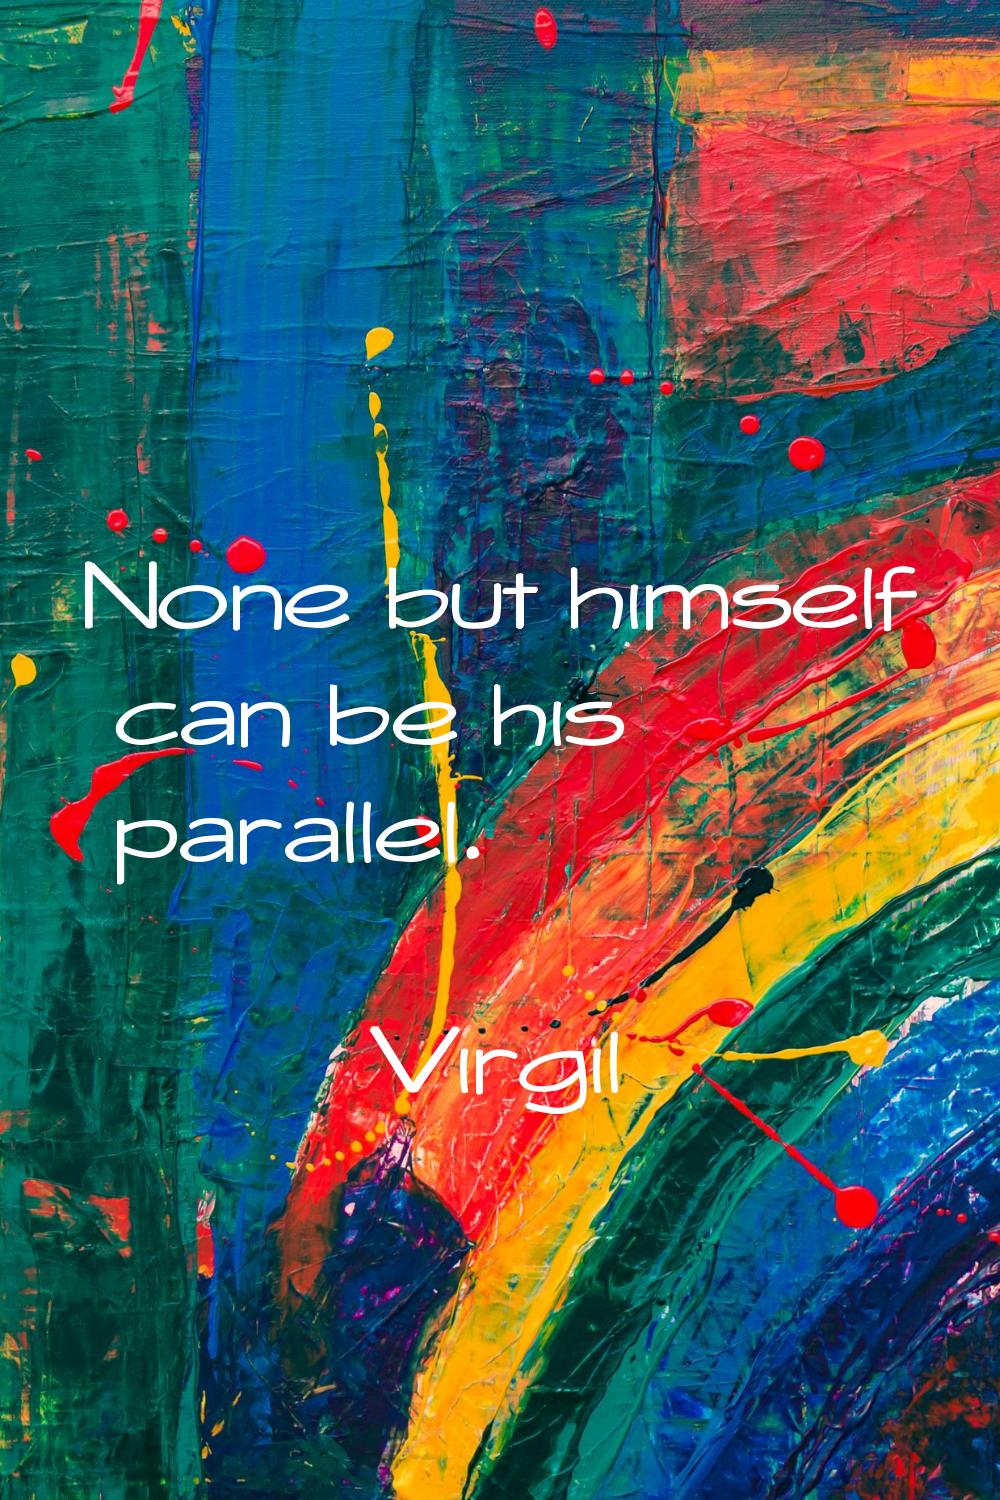 None but himself can be his parallel.